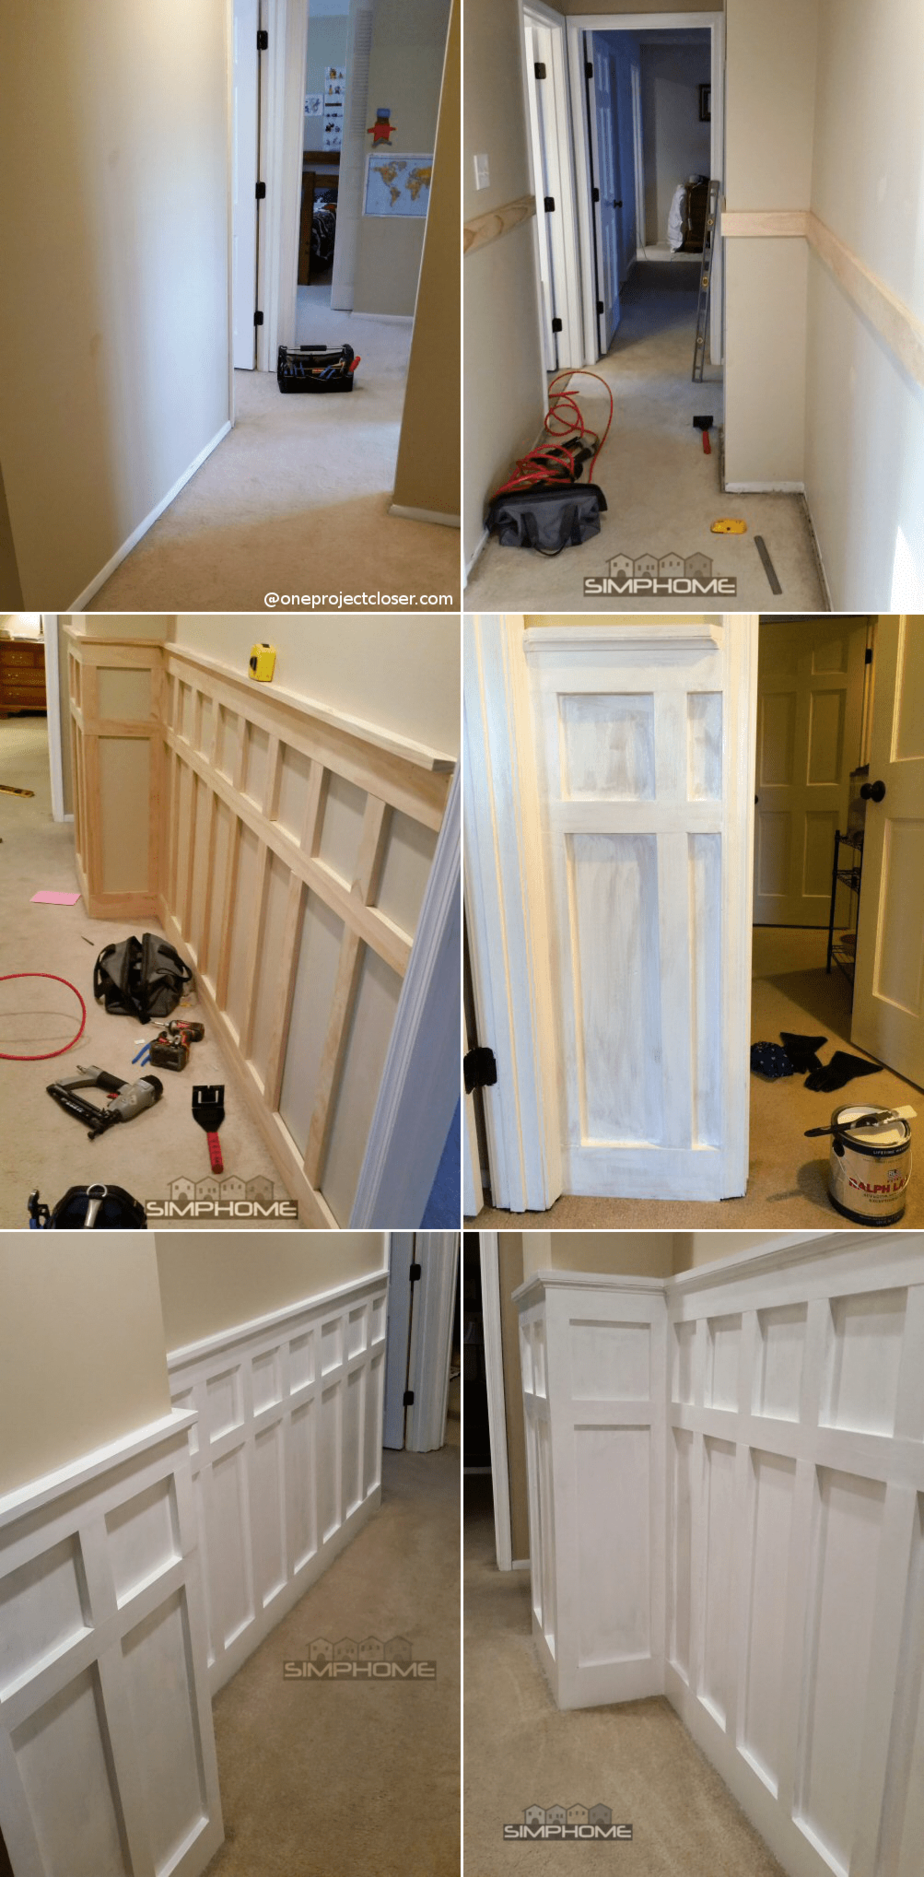 8.Board and Batten Wainscoting in the Bedroom via Simphome.com